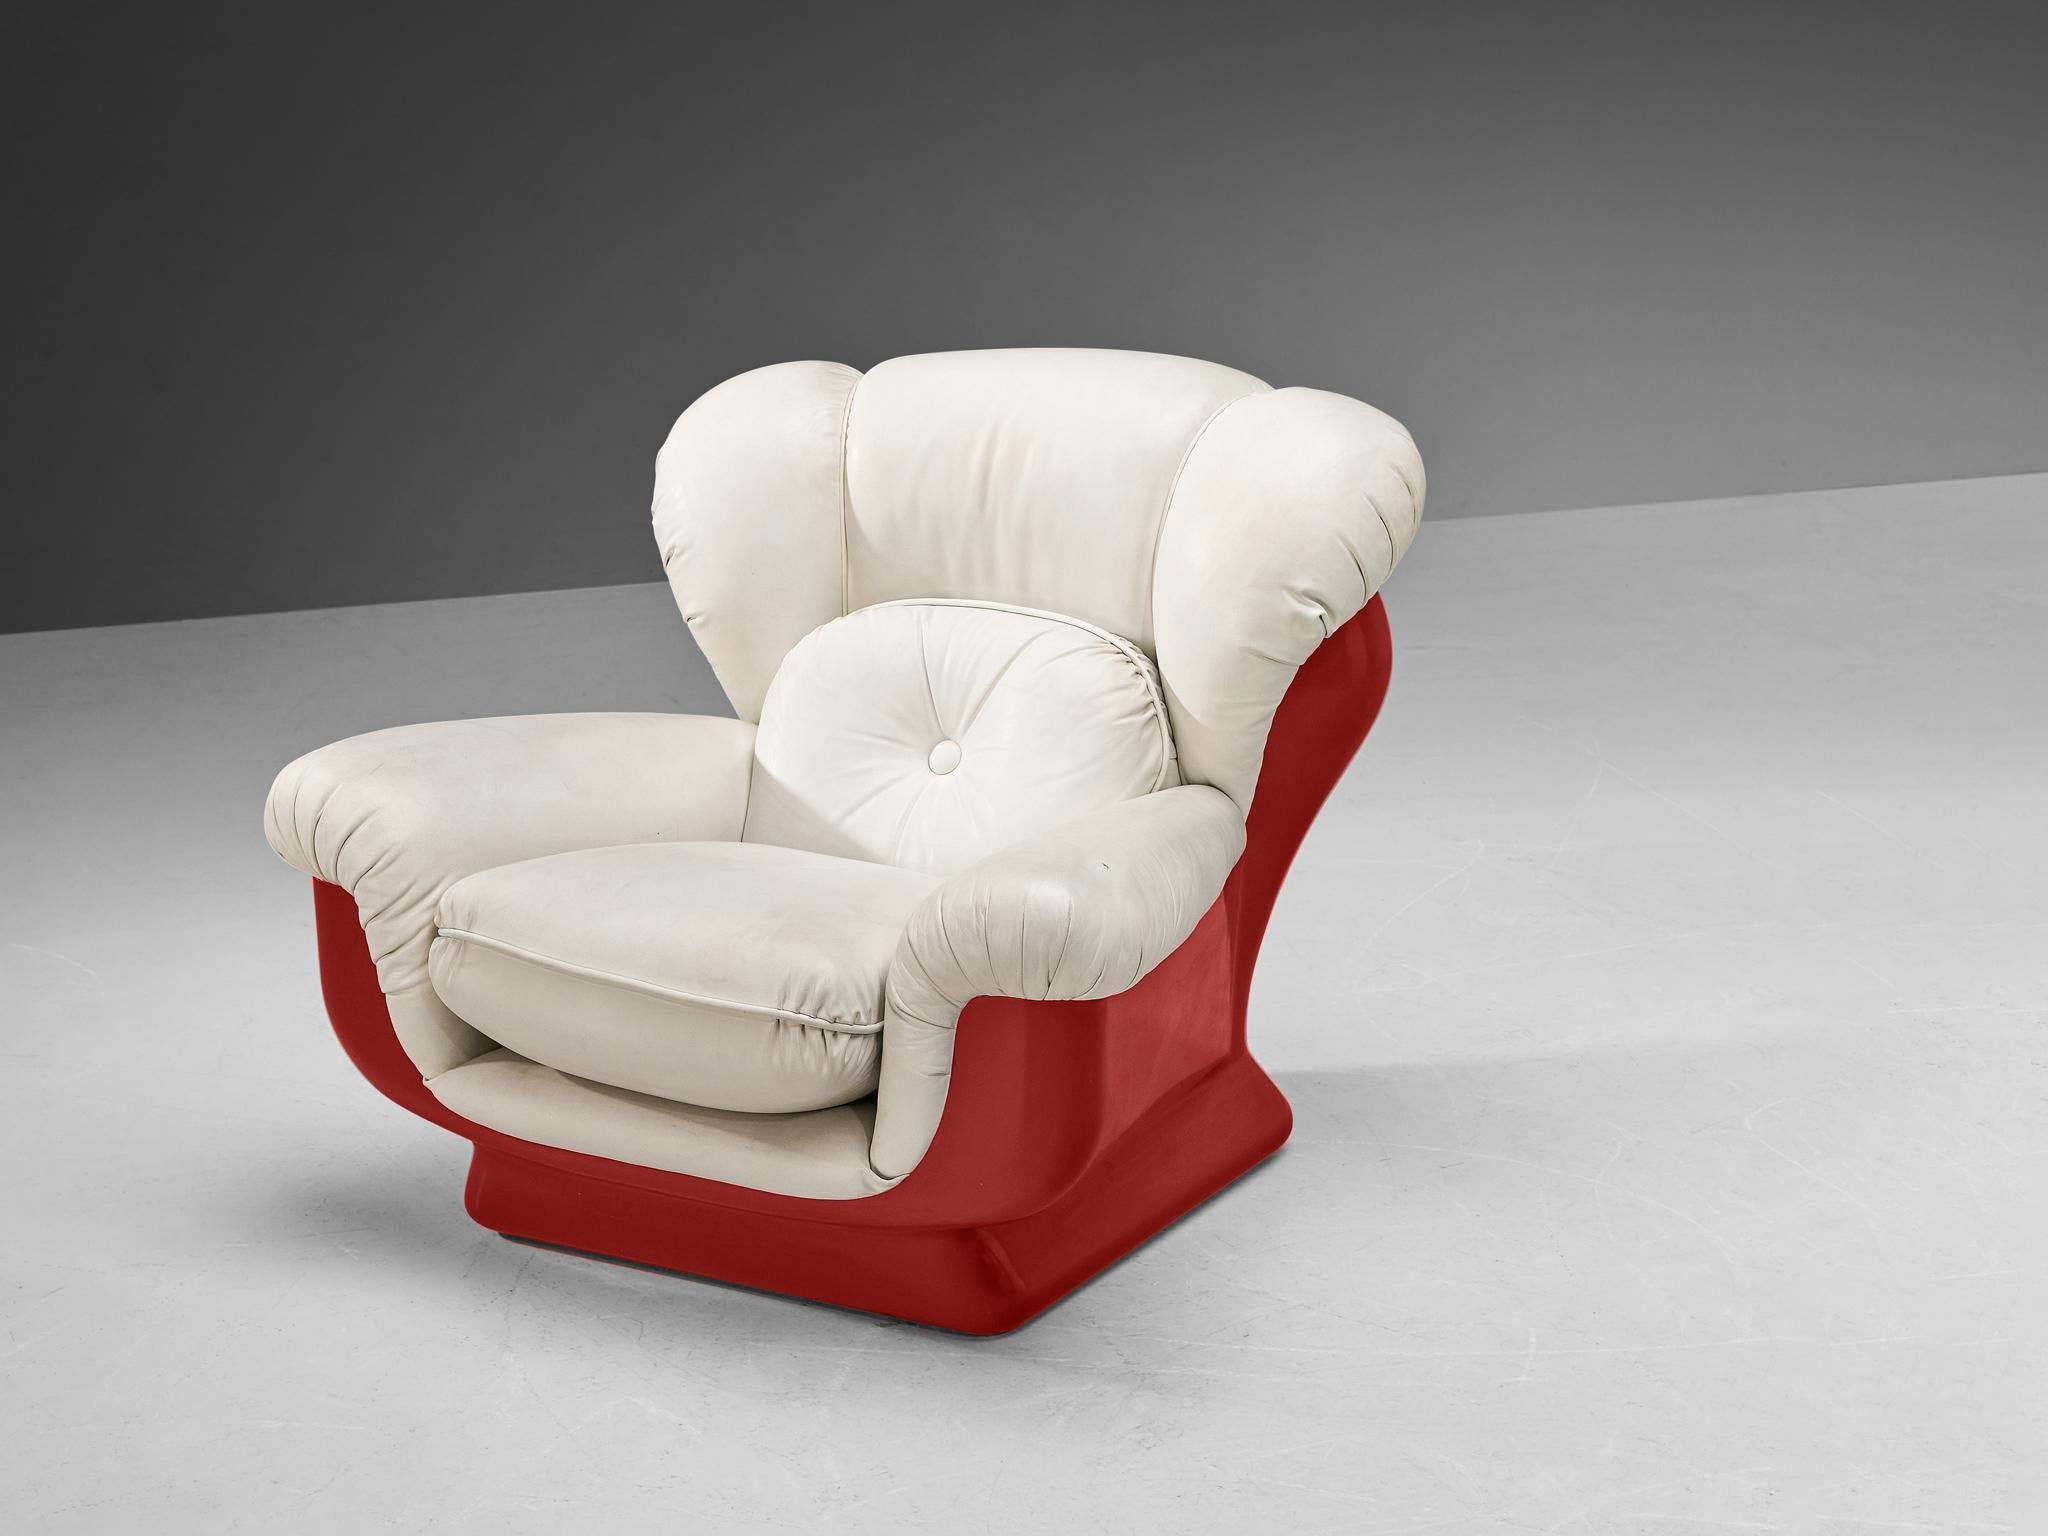 Italian Bulky Pair of Lounge Chairs in Red Fiberglass and Leatherette  For Sale 2